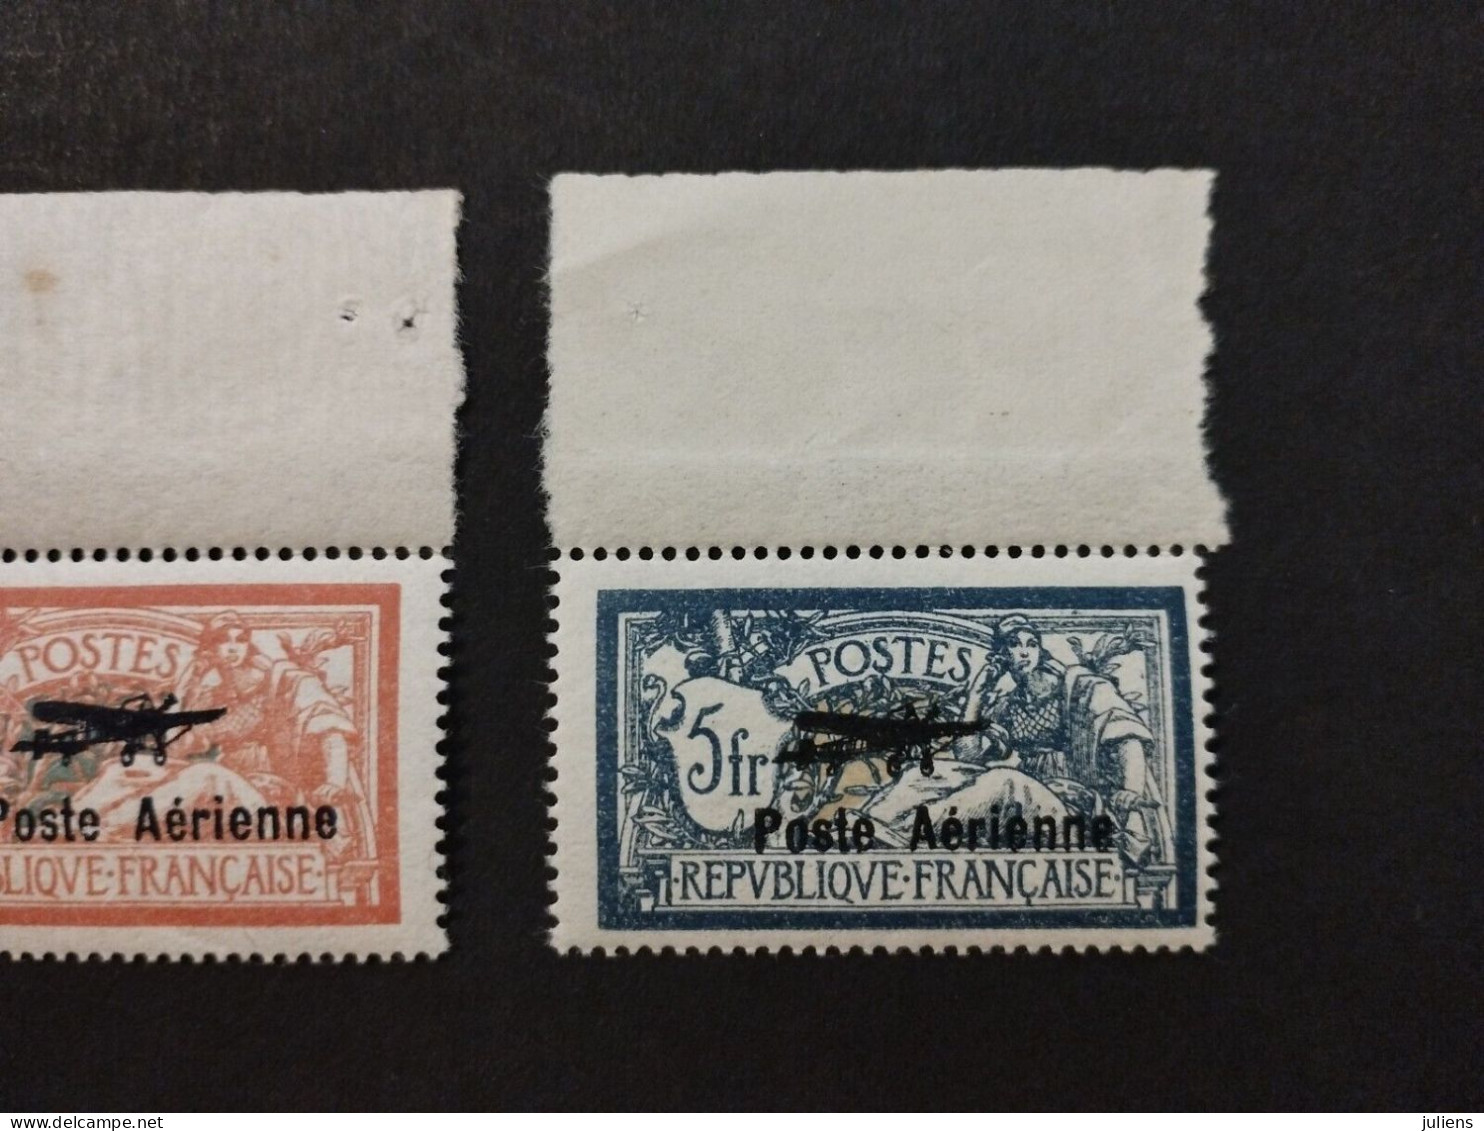 TIMBRE FRANCE POSTE AERIENNE PA 1 + 2 NEUF** BORD DE FEUILLE COTE +++ #278 - 1927-1959 Mint/hinged